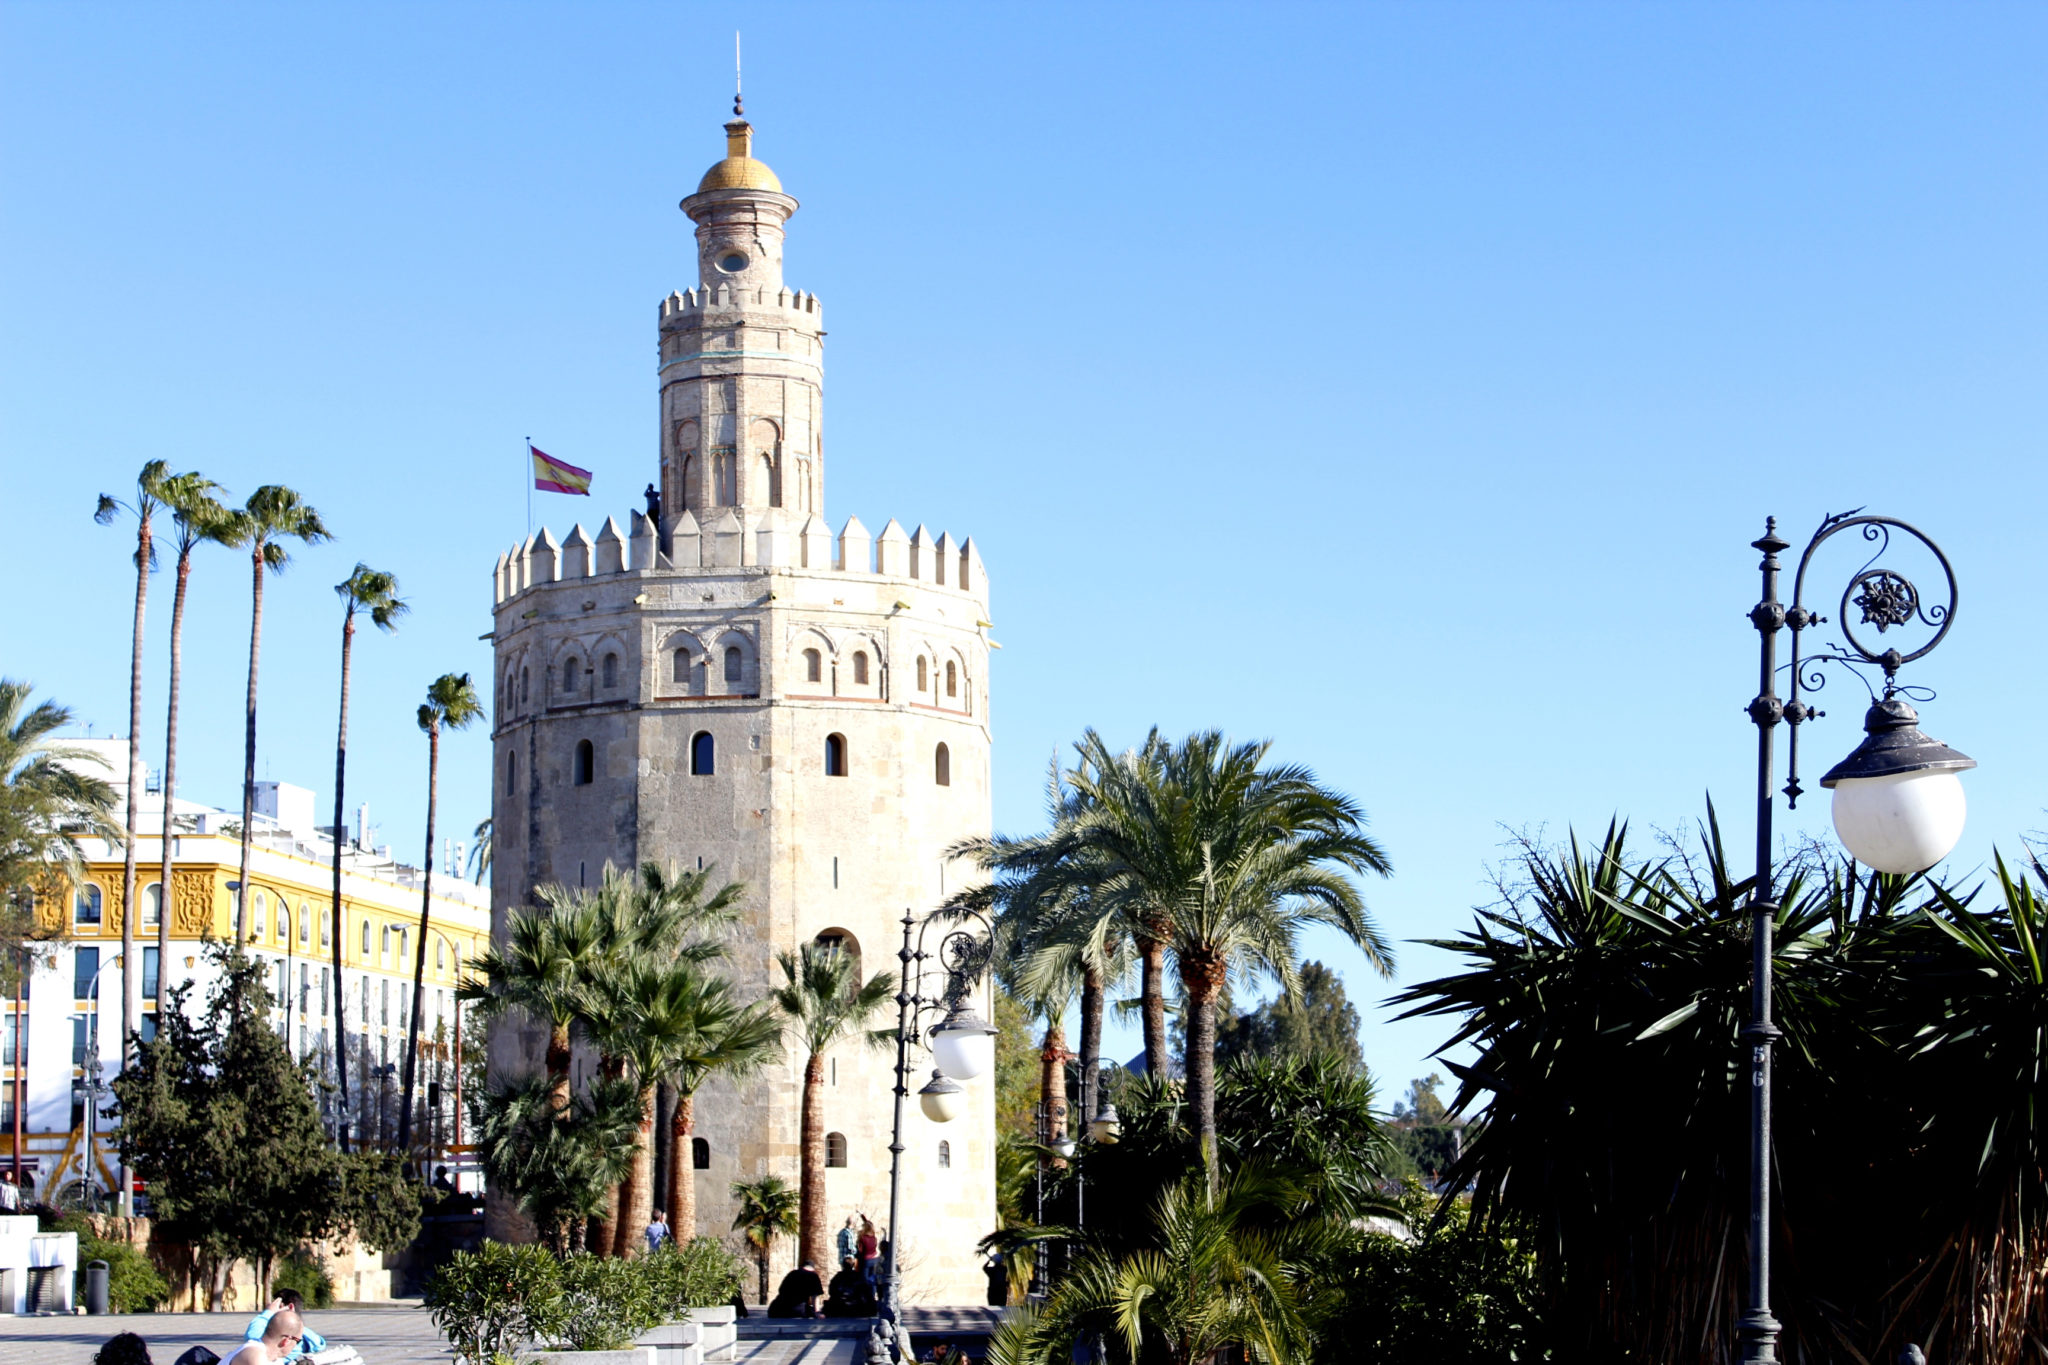 Torre del Oro is a cool landmark to stay near in Seville!